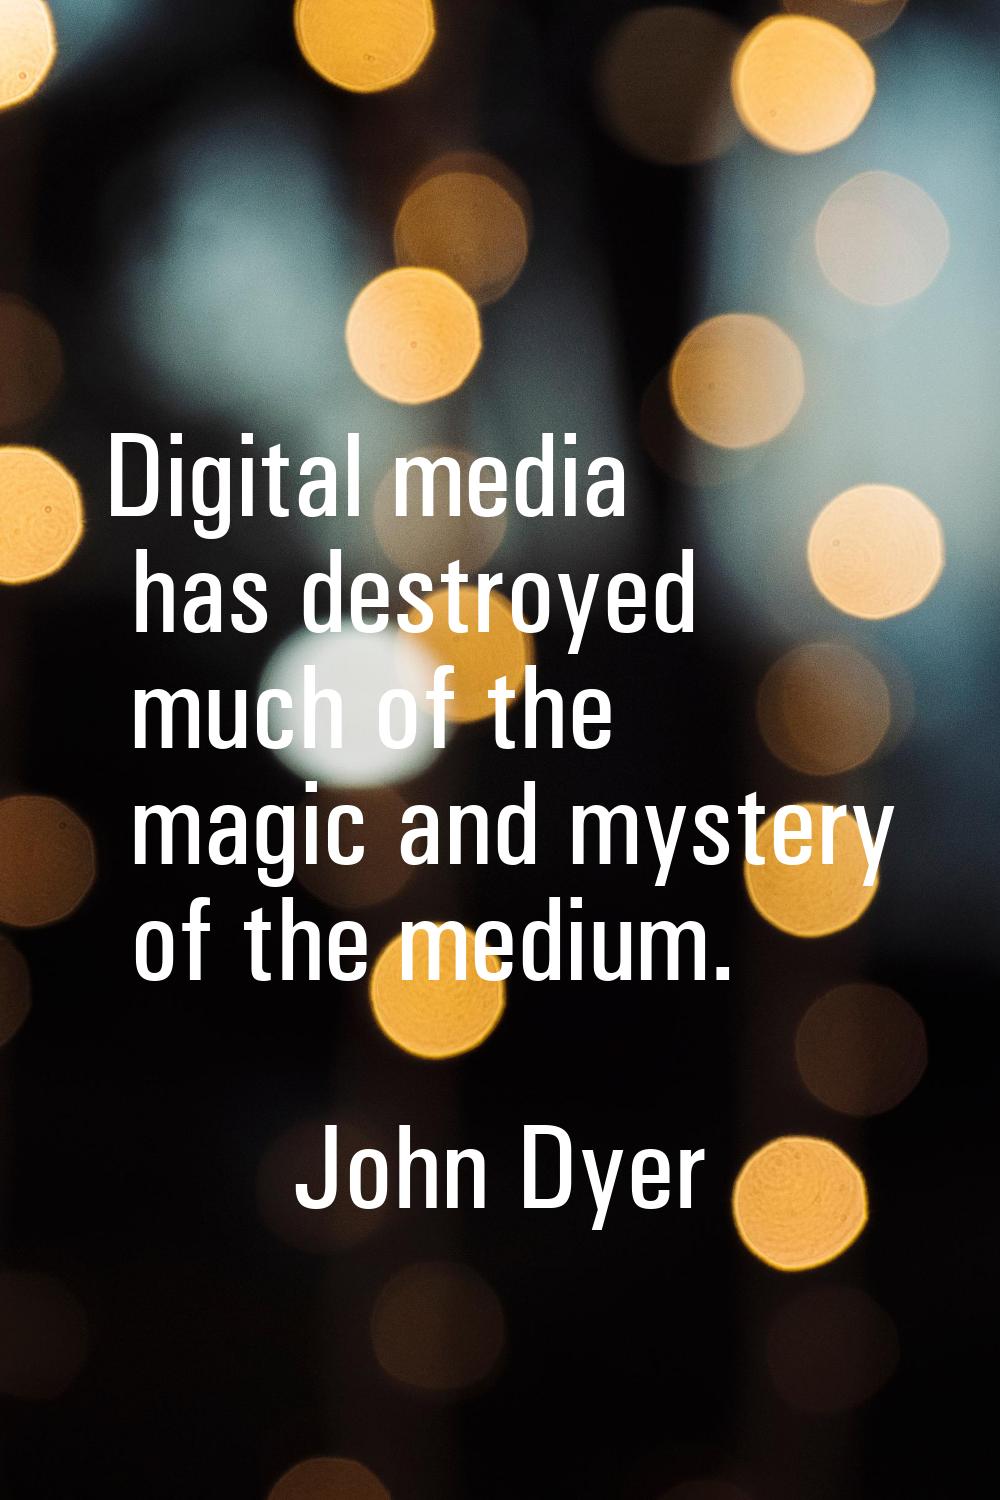 Digital media has destroyed much of the magic and mystery of the medium.